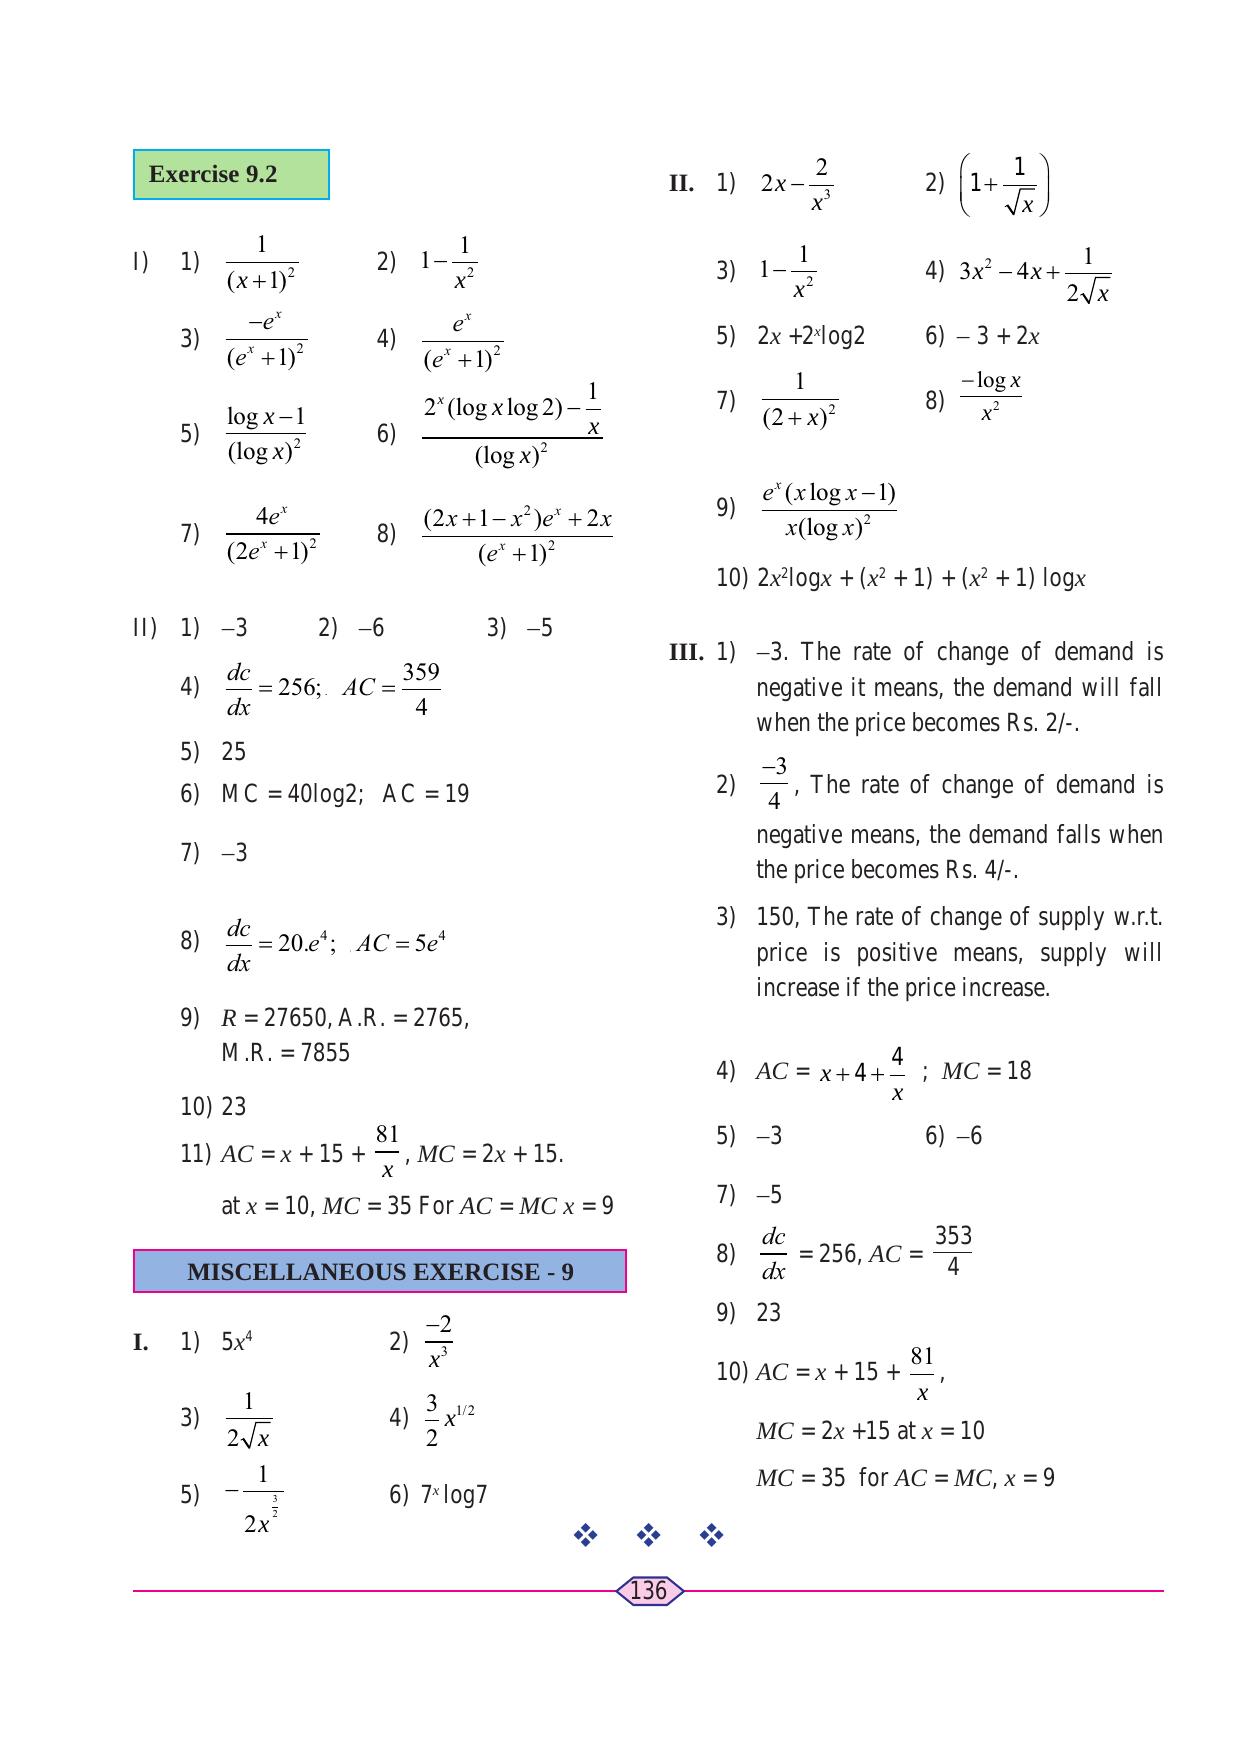 Maharashtra Board Class 11 Maths (Commerce) (Part 1) Textbook - Page 146